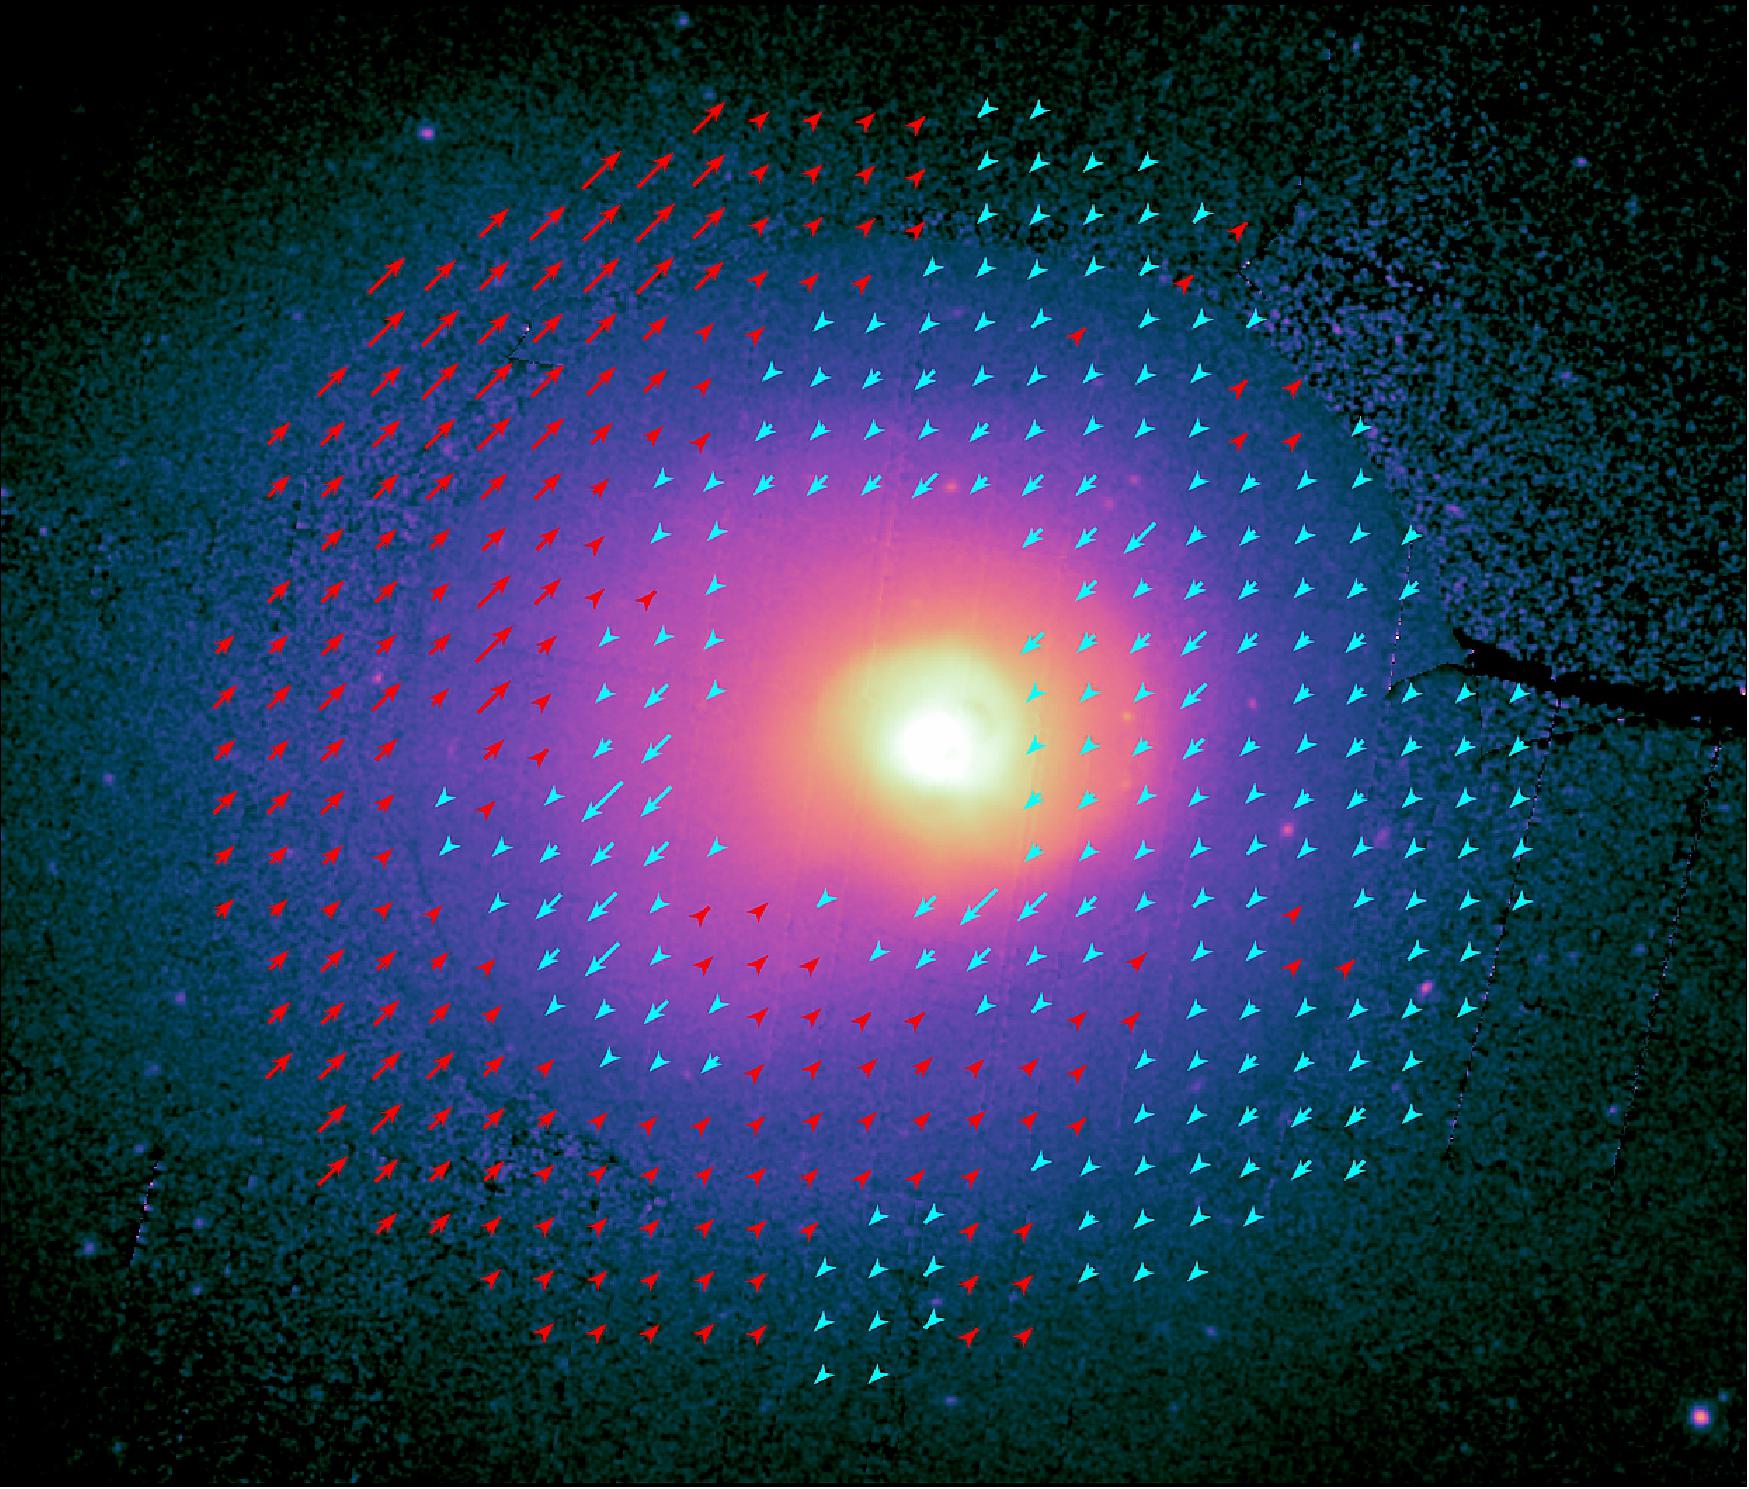 Figure 48: Gas motions in the Perseus cluster. This image shows the Perseus galaxy cluster – one of the most massive known objects in the Universe – in X-rays, as seen by XMM-Newton’s EPIC (European Photon Imaging Camera). The central region of the cluster can be seen glowing brightly, with its diffuse outer regions extending outwards from the middle of the frame. Perseus’ density rises quickly as one approaches the cluster’s cool center; this is reflected in its X-ray brightness, which changes rapidly with radius (as illustrated by the coloring of this image). The overlaid blue and red arrows show the motion of the gas in the region (relative to the cluster itself), with blue arrows representing gas moving towards us, and red representing gas moving away. The length of the ‘tail’ on the arrows represents the size of the velocity: the longer the arrow tail, the faster the gas is moving. This image is part of a new study of Perseus that spotted the first signs of this gas splashing and sloshing around – a behavior that, while predicted, had never been seen before (image credit: ESA/XMM-Newton/J. Sanders et al. 2019)